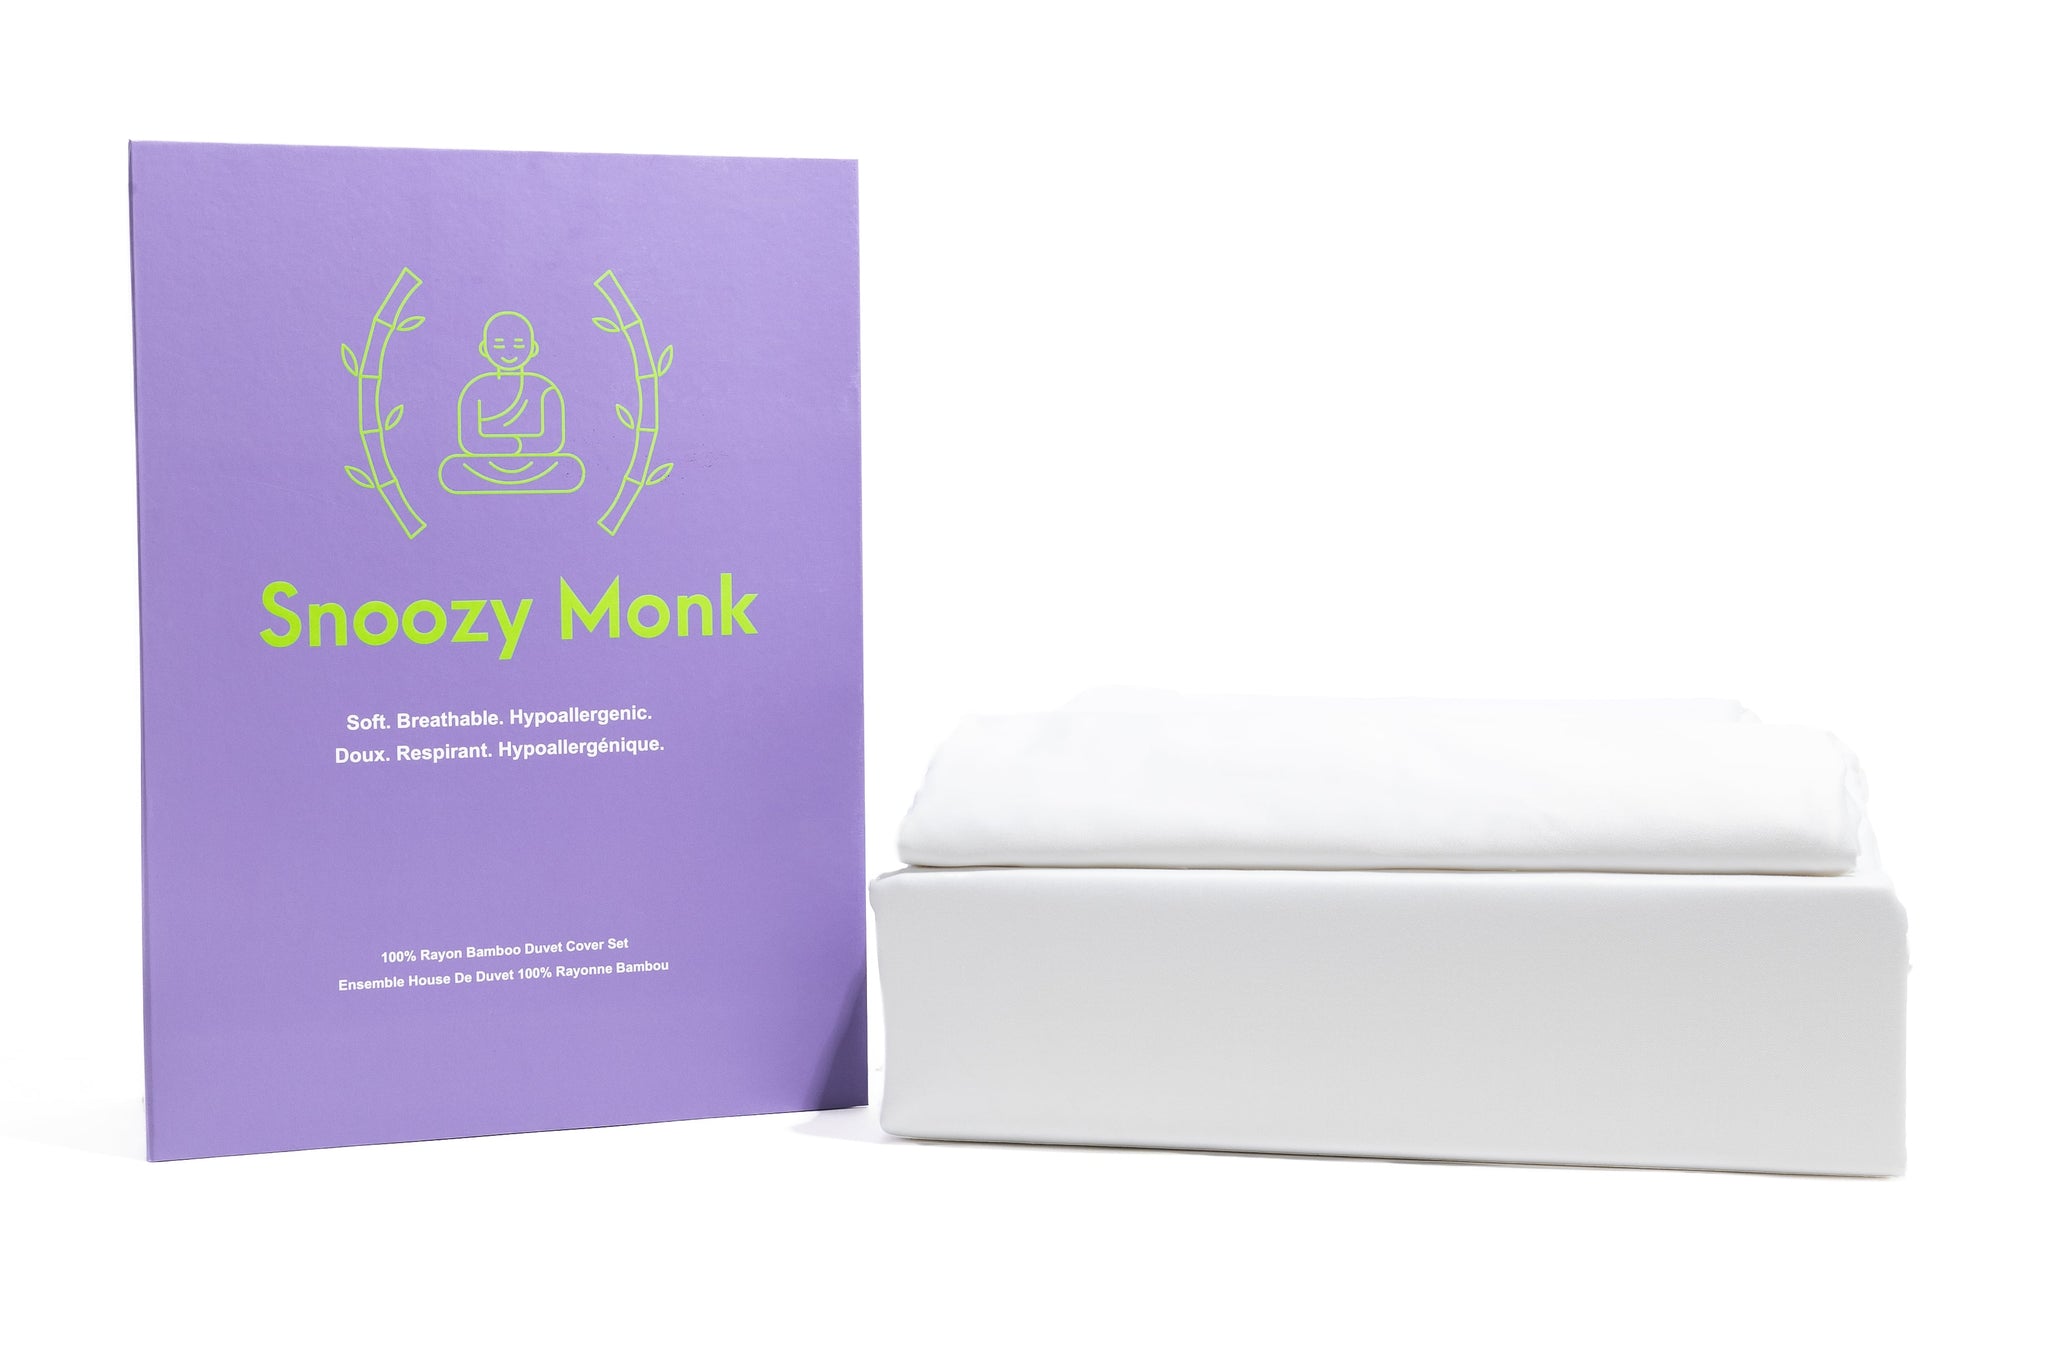 A White Snoozy Monk Bamboo Duvet Cover Set